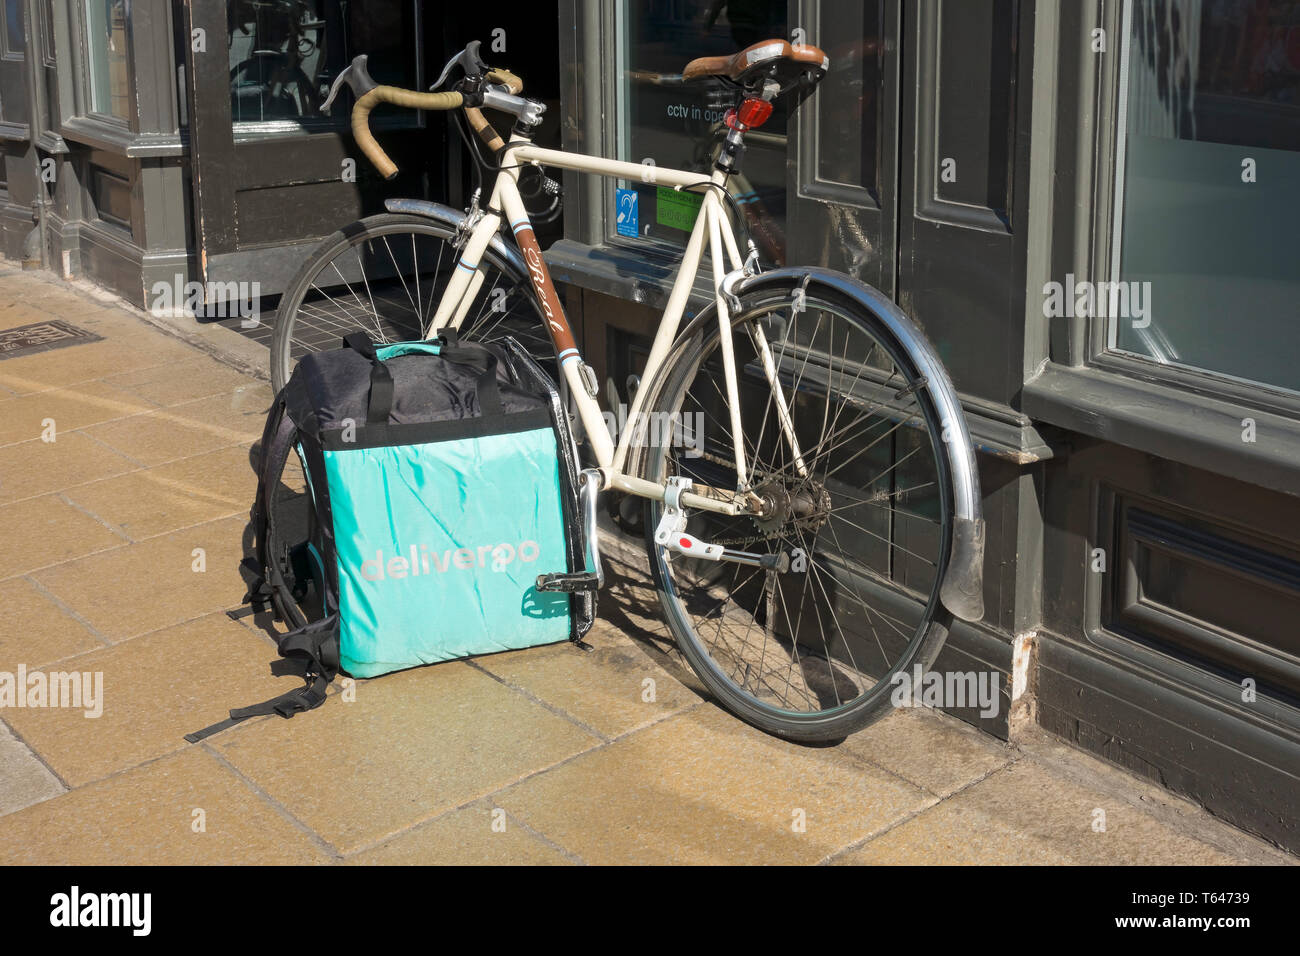 Close up of Deliveroo box food meal delivery company service and bike parked outside restaurant England UK United Kingdom GB Great Britain Stock Photo